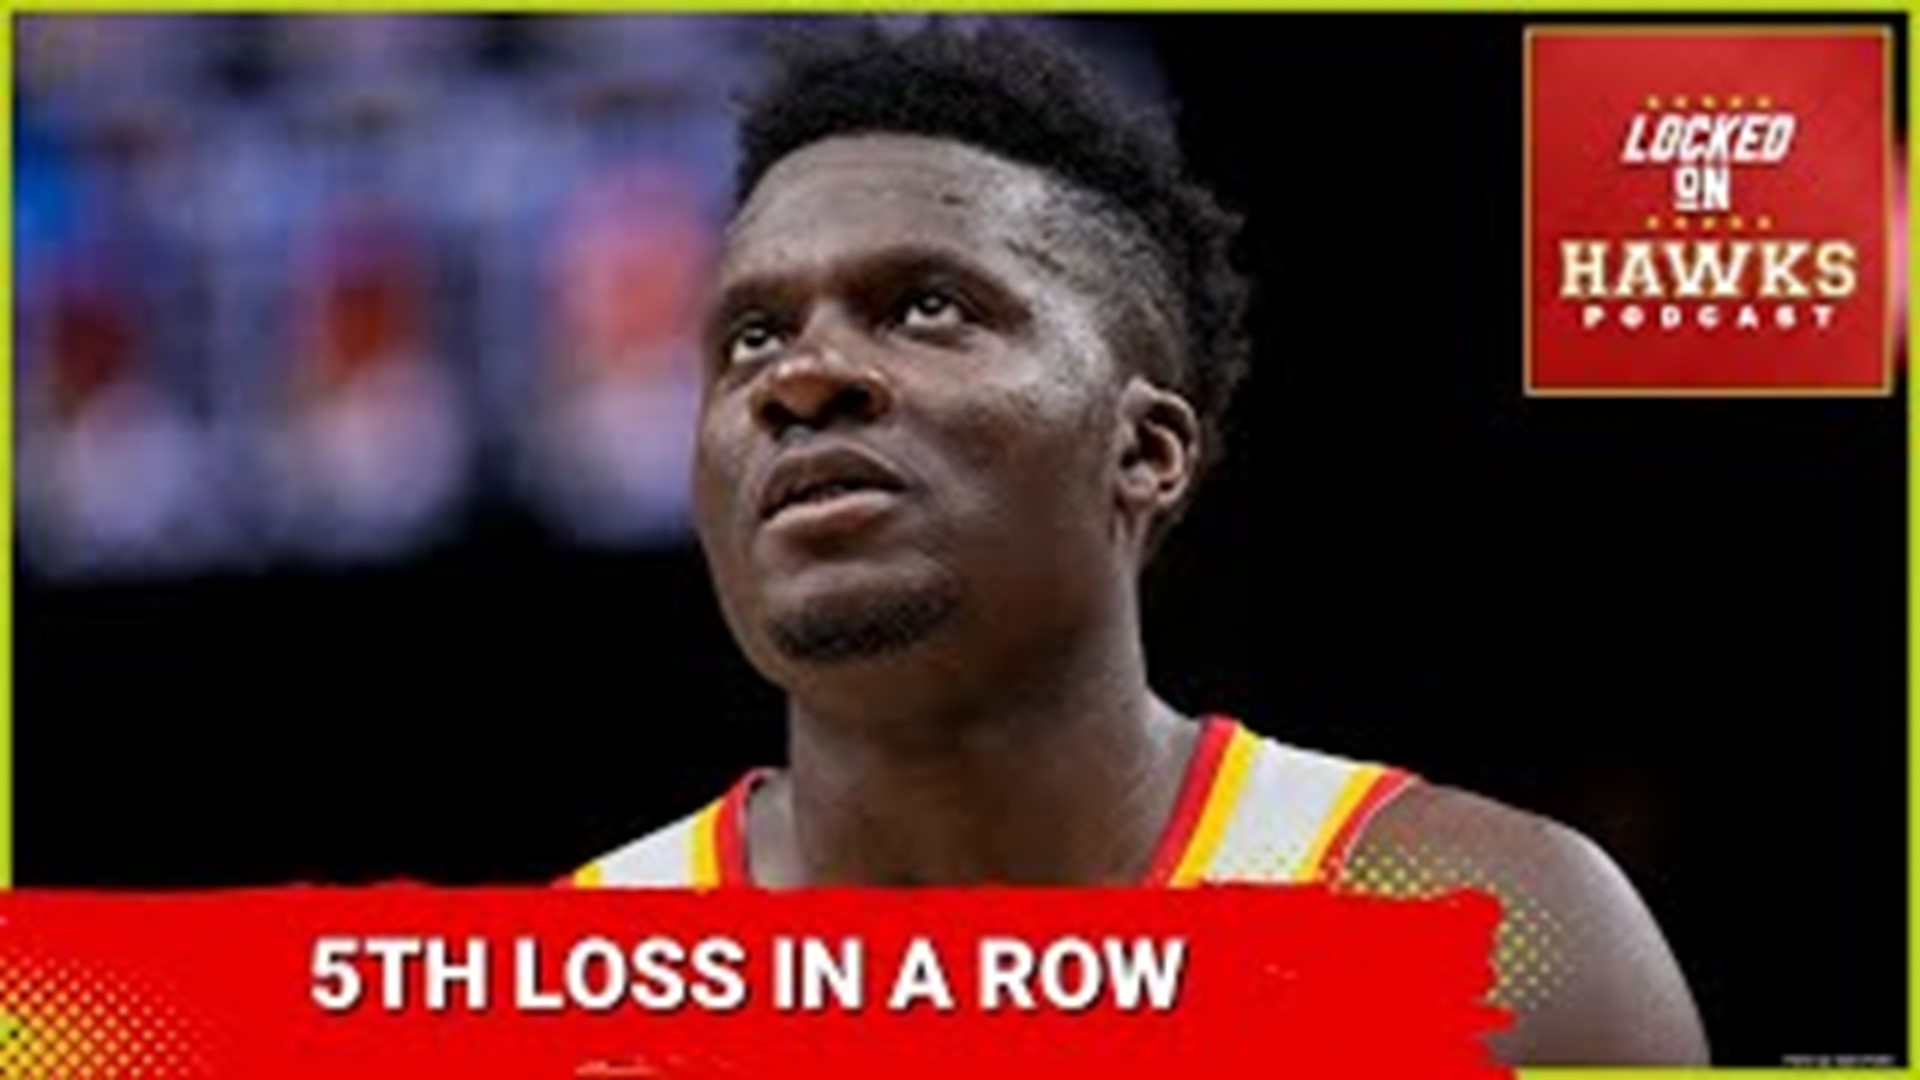 Brad Rowland  hosts episode No. 1608 of the Locked on Hawks podcast. The show breaks down Wednesday's game between the Atlanta Hawks and the Toronto Raptors.